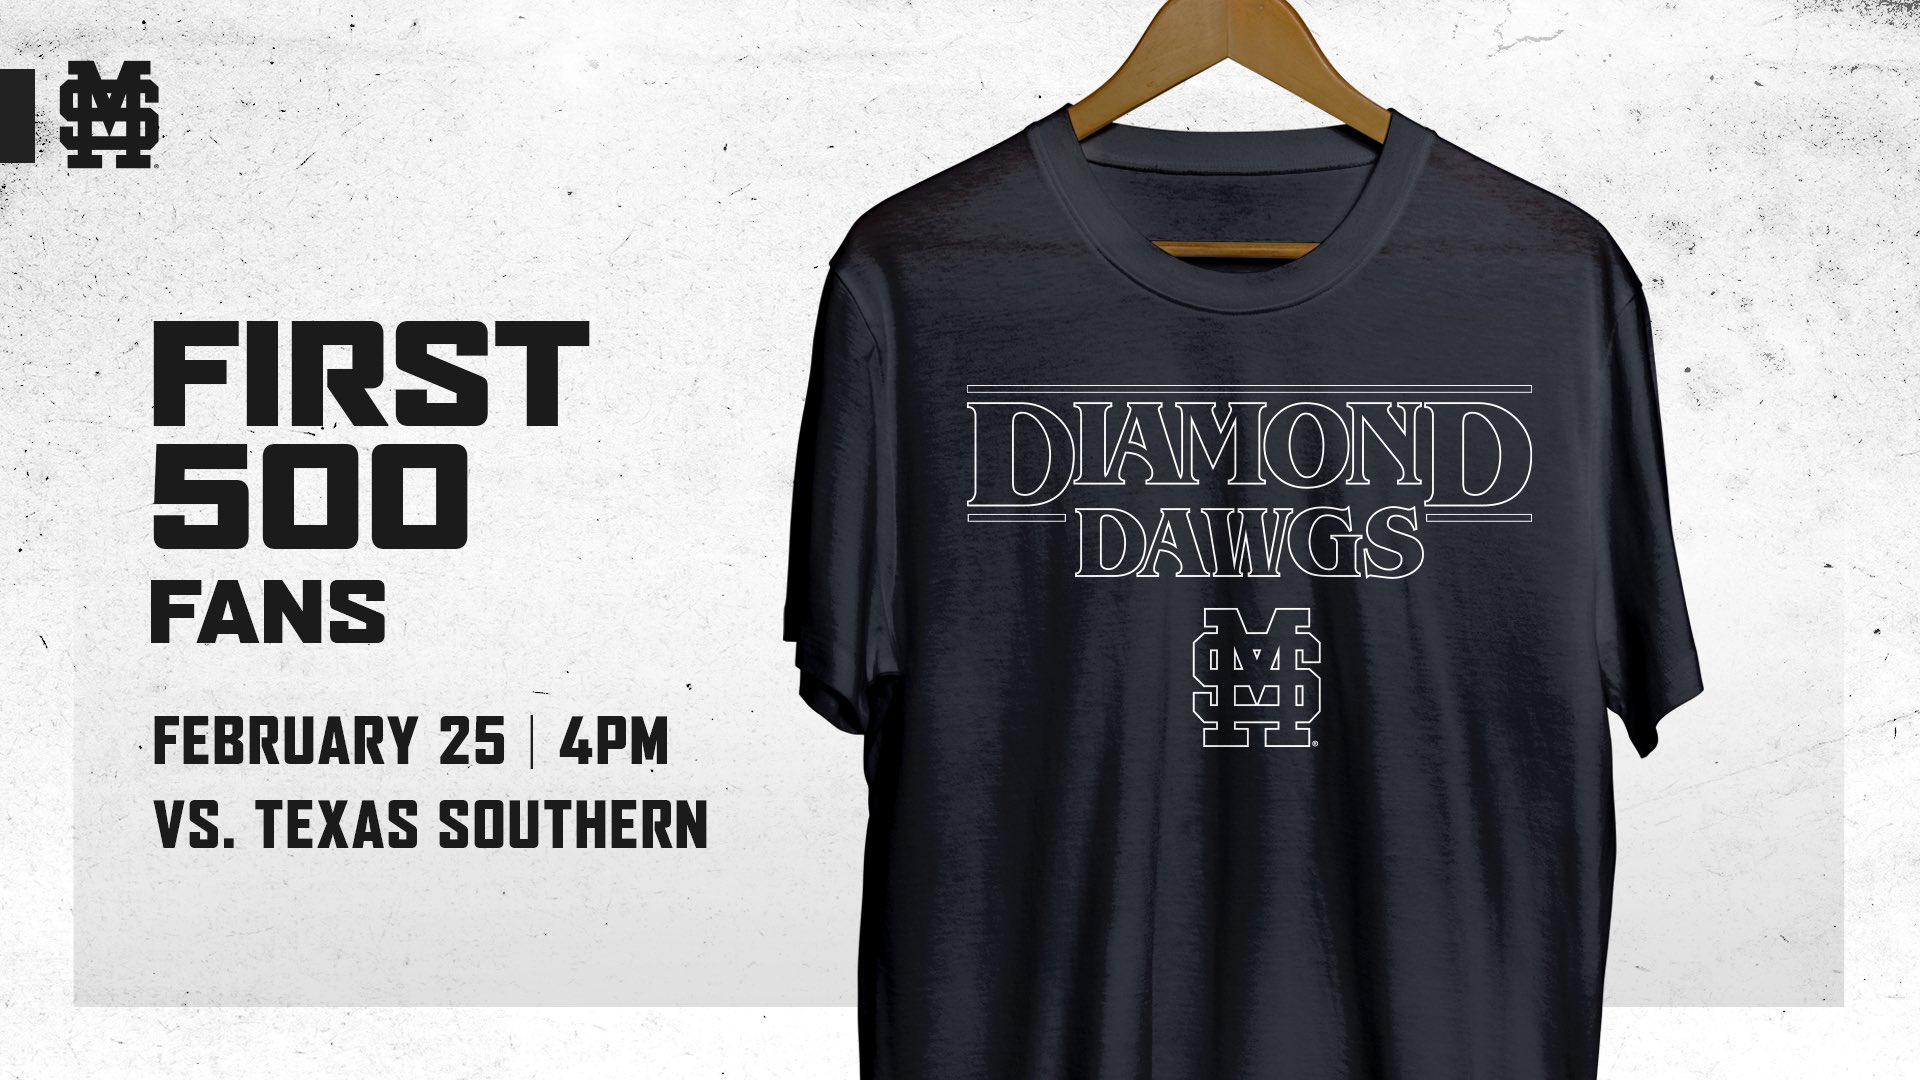 Black T-shirt promotional graphic for MSU Baseball